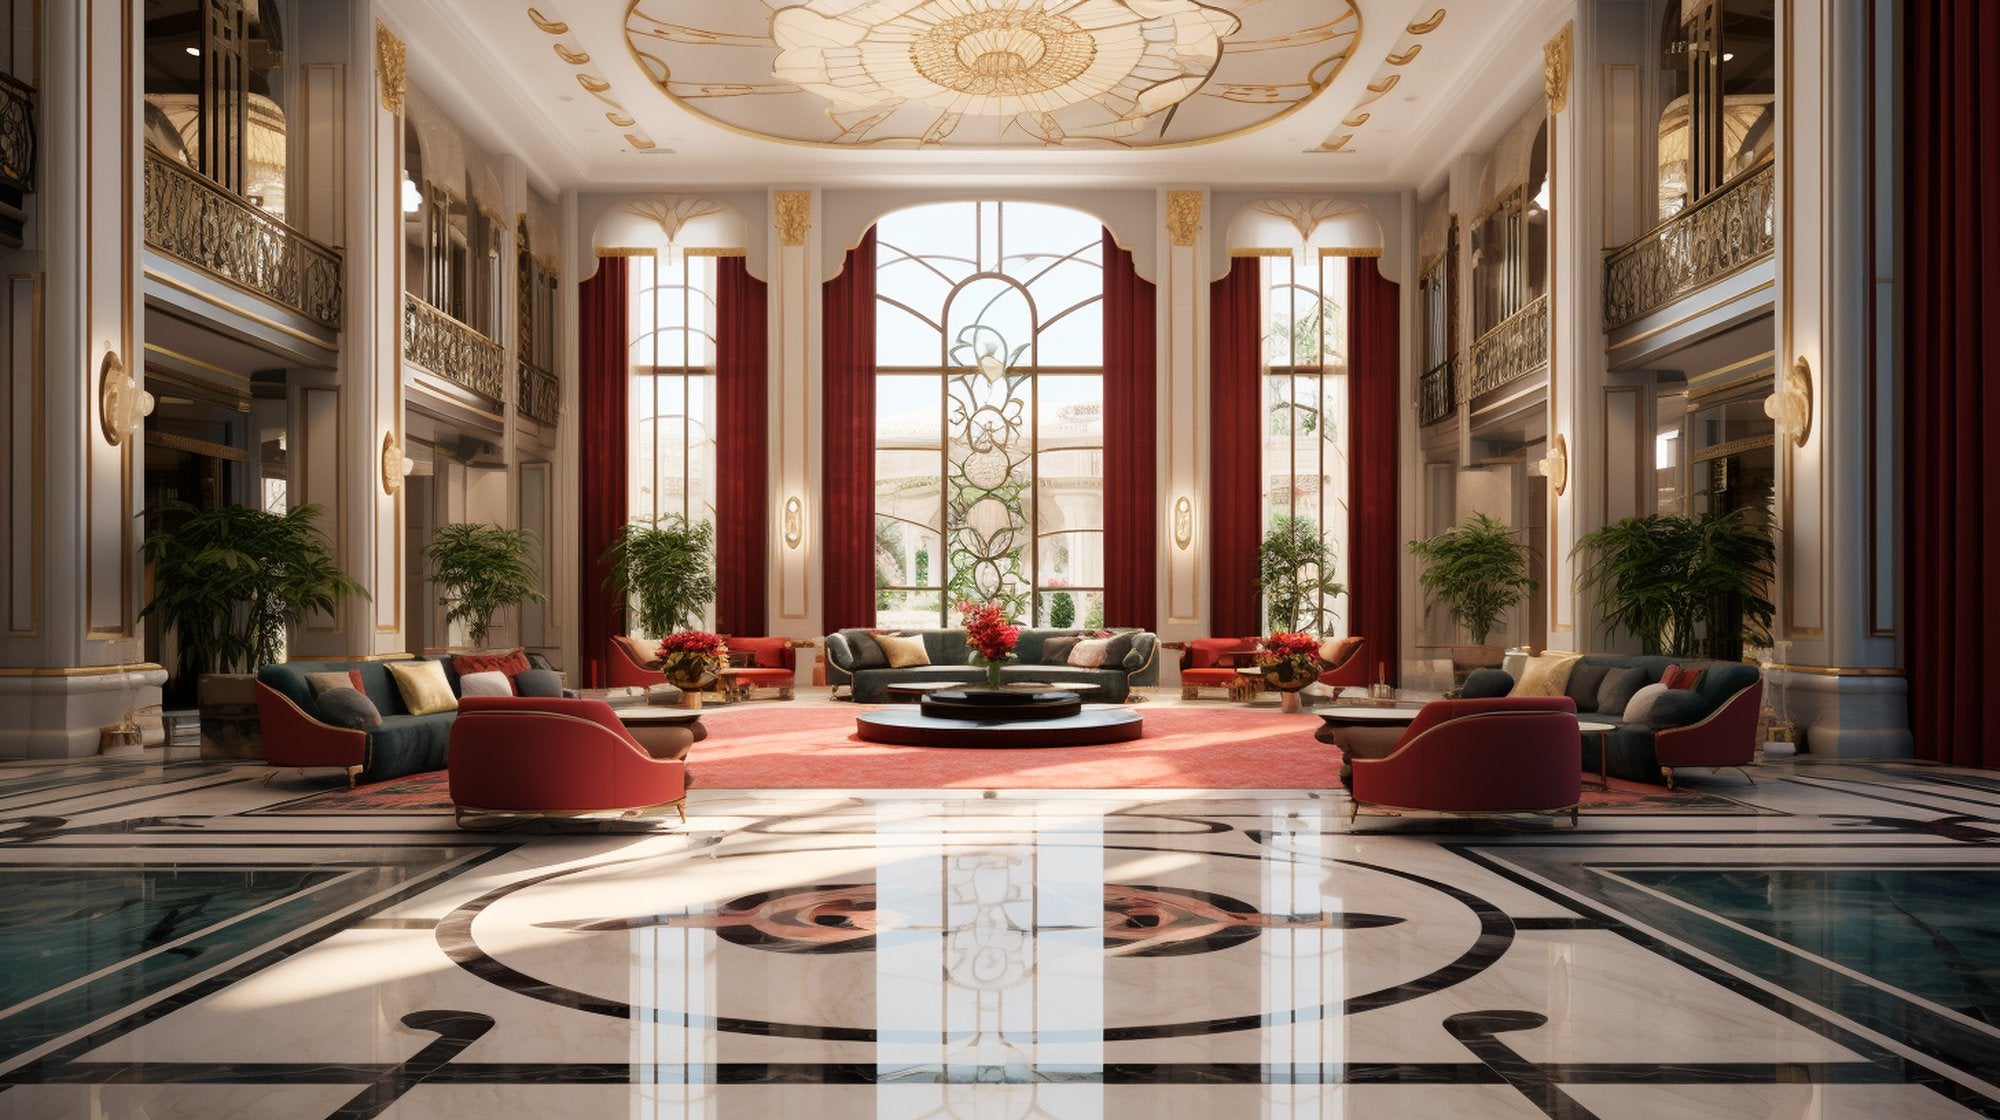 Opulent Art Deco-inspired interior design infused with AI Art and AI Generated Artwork